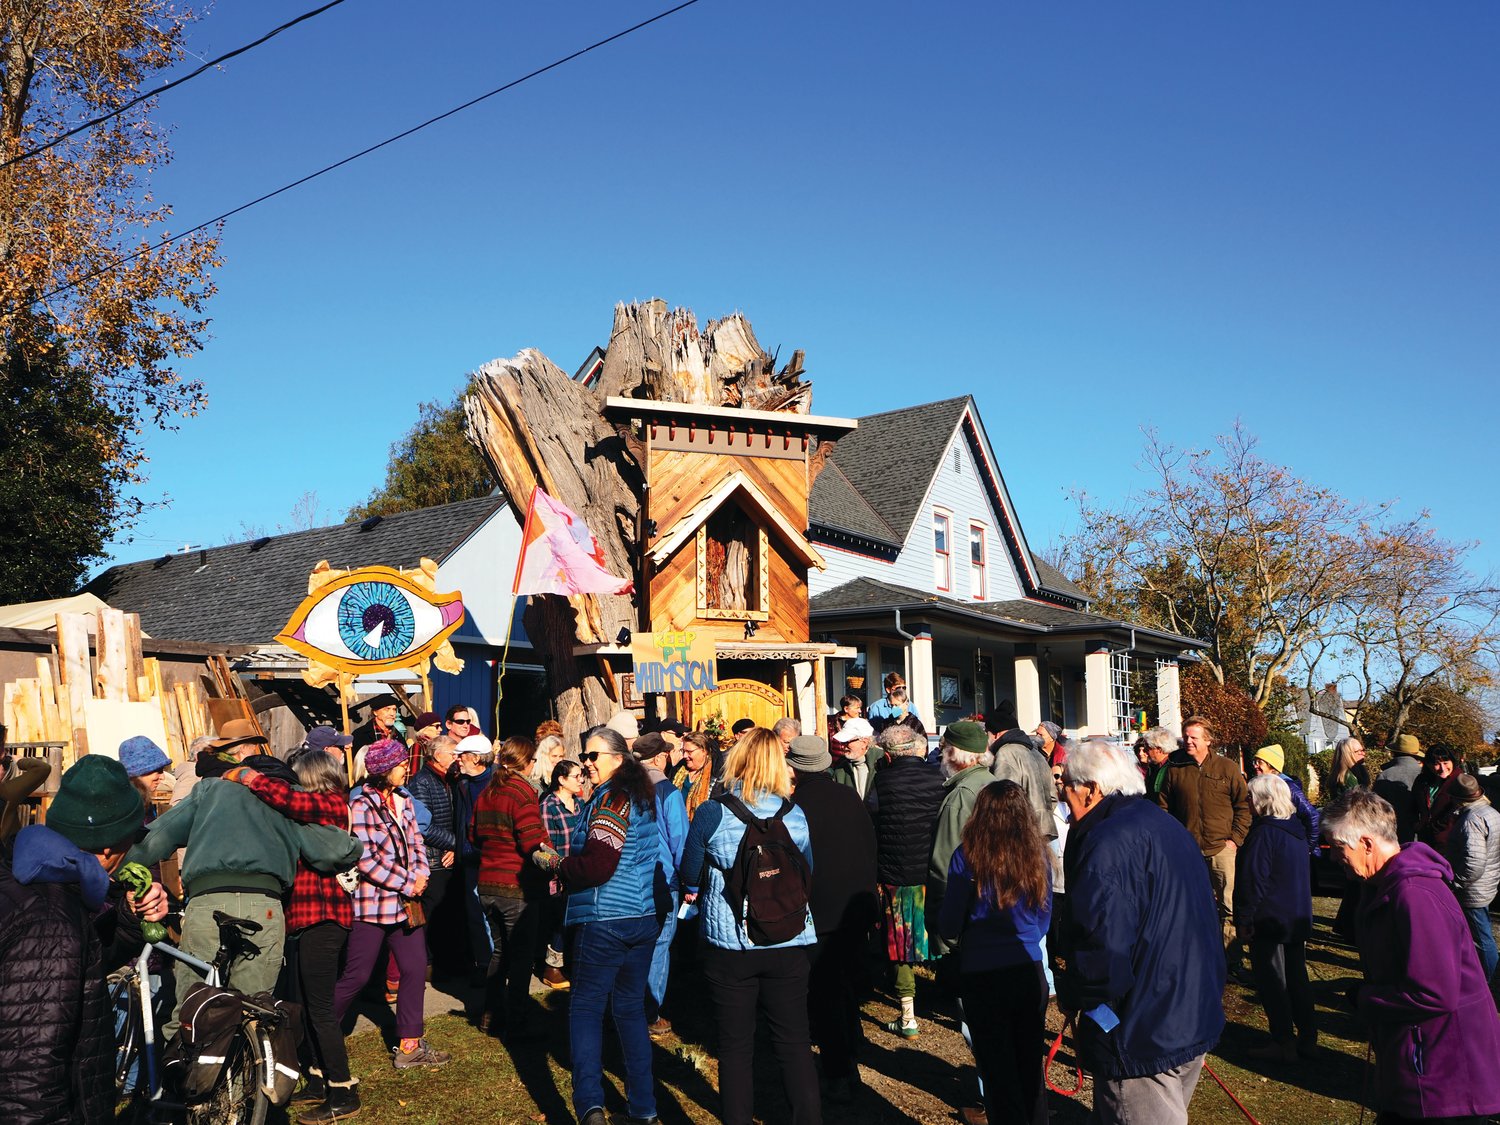 A crowd of almost 100 people gathered around the Raccoon Lodge on Saturday, Nov. 12 to both celebrate the work and voice their support of it staying in place.